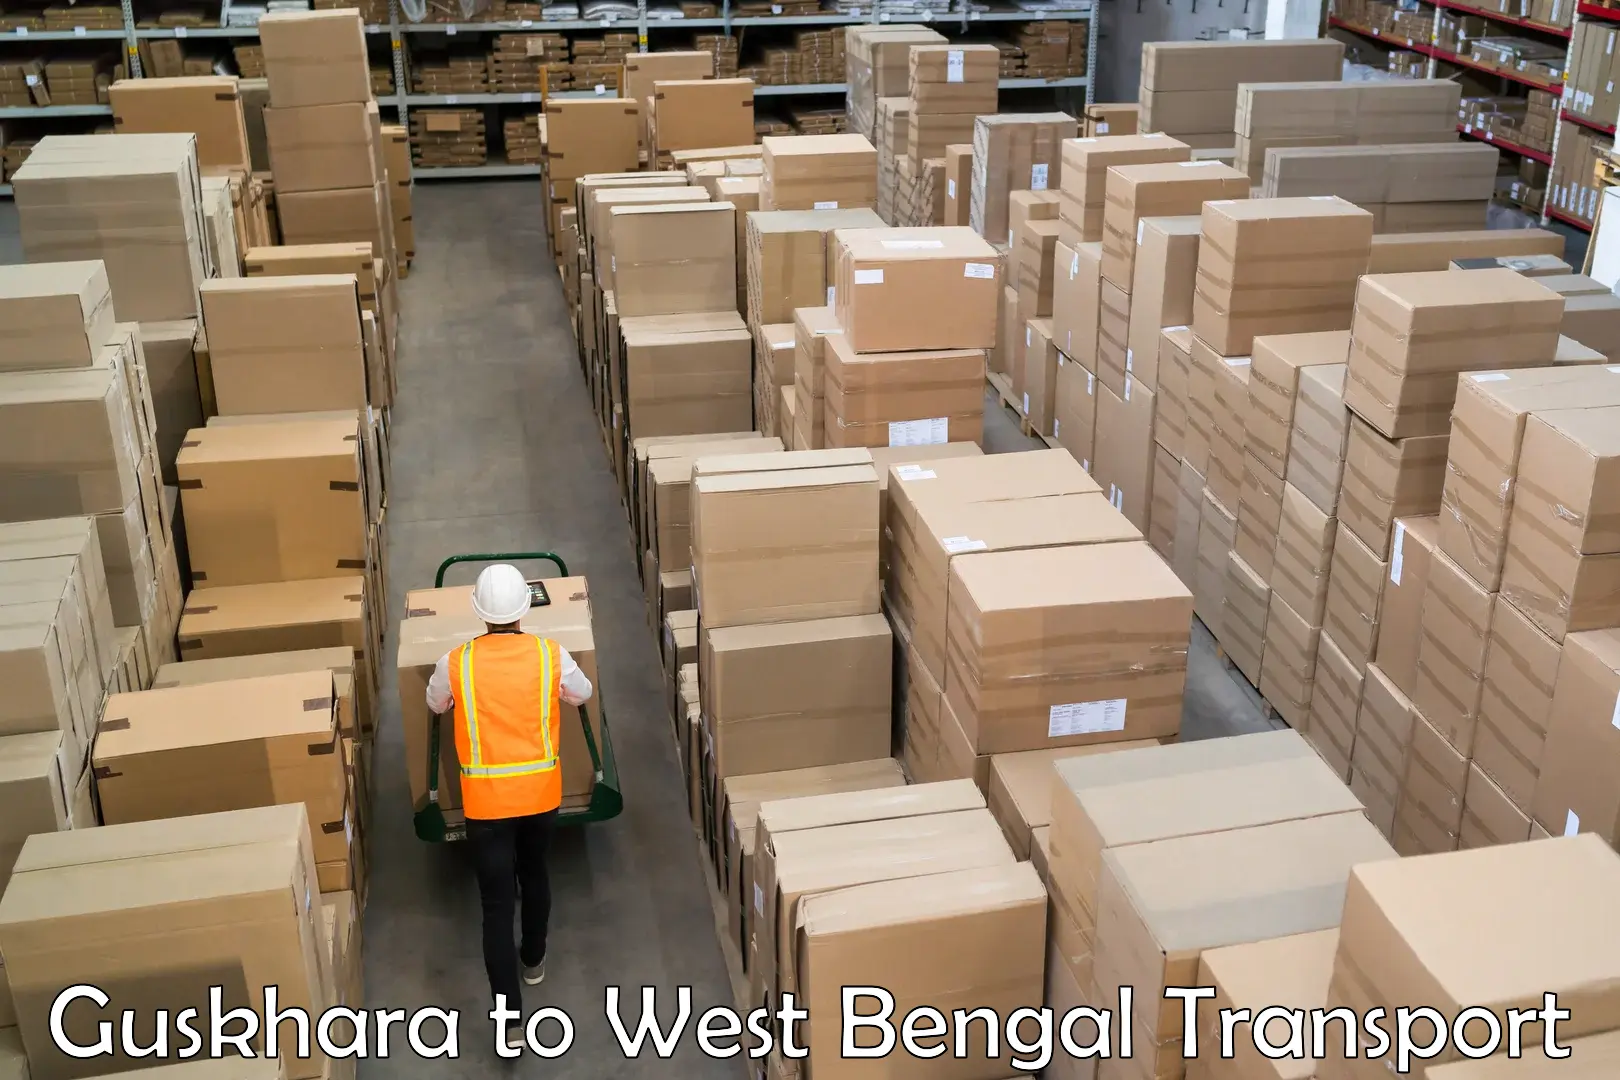 Truck transport companies in India Guskhara to West Bengal